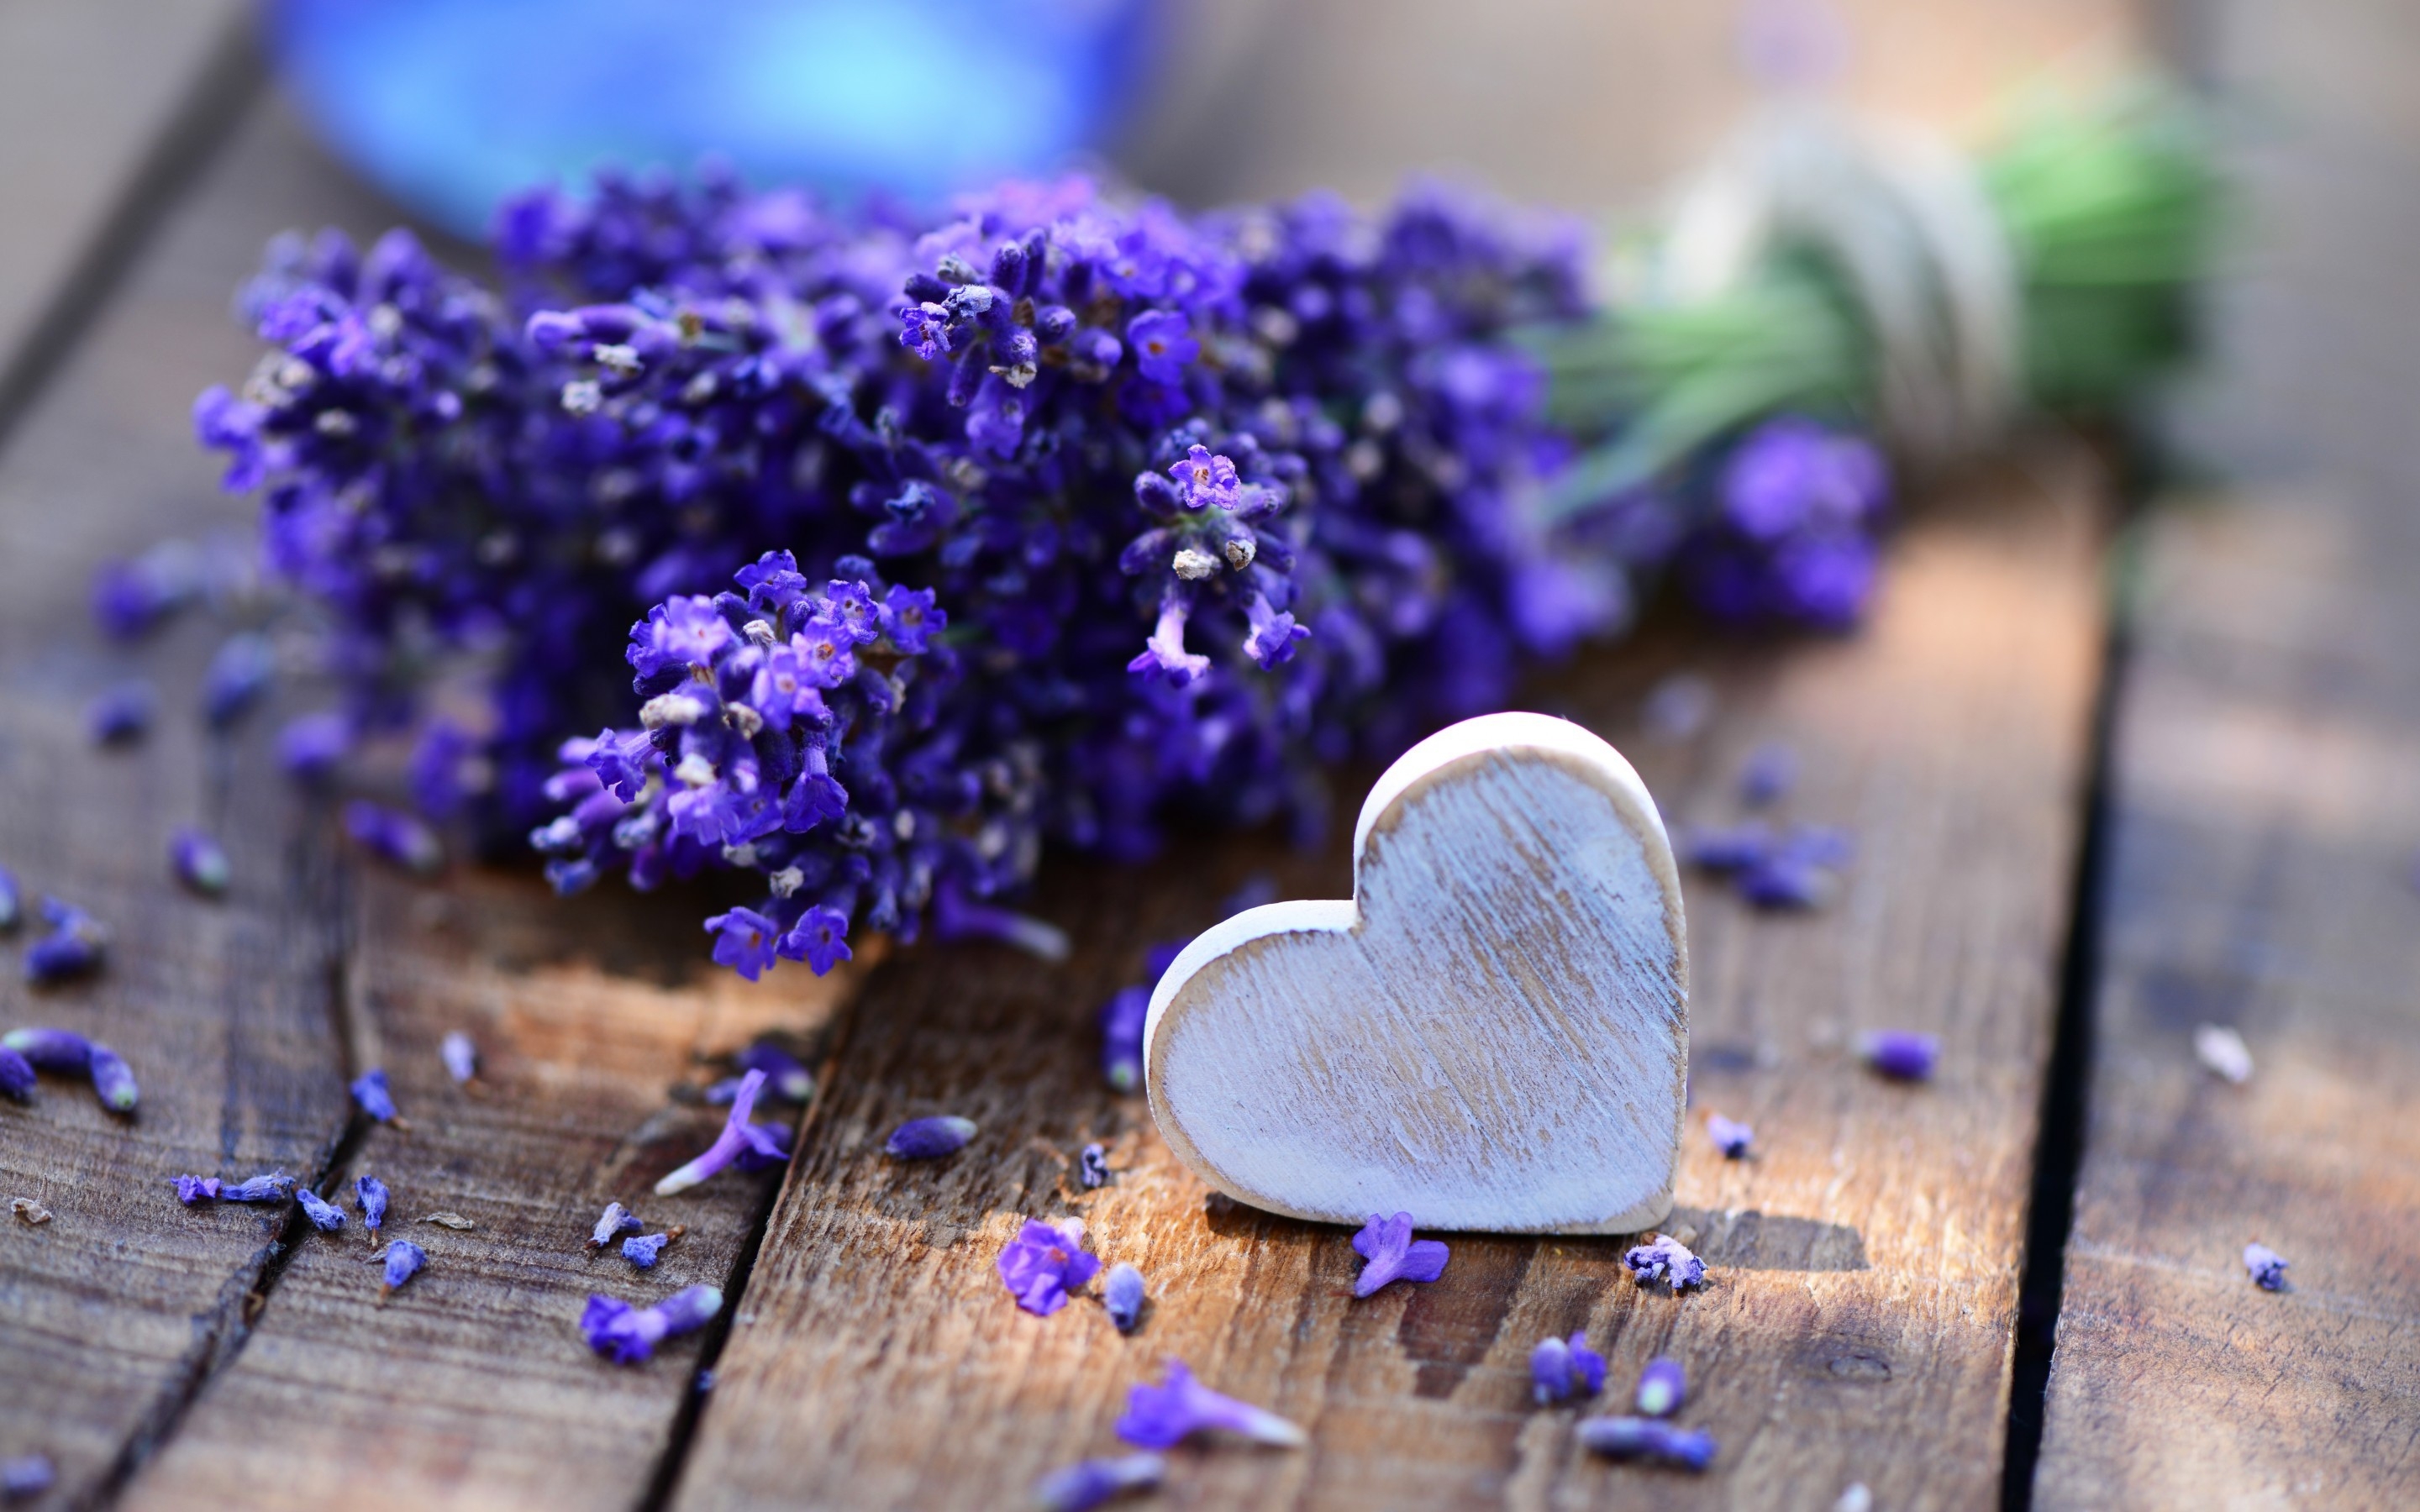 Lavender and Heart for 2880 x 1800 Retina Display resolution